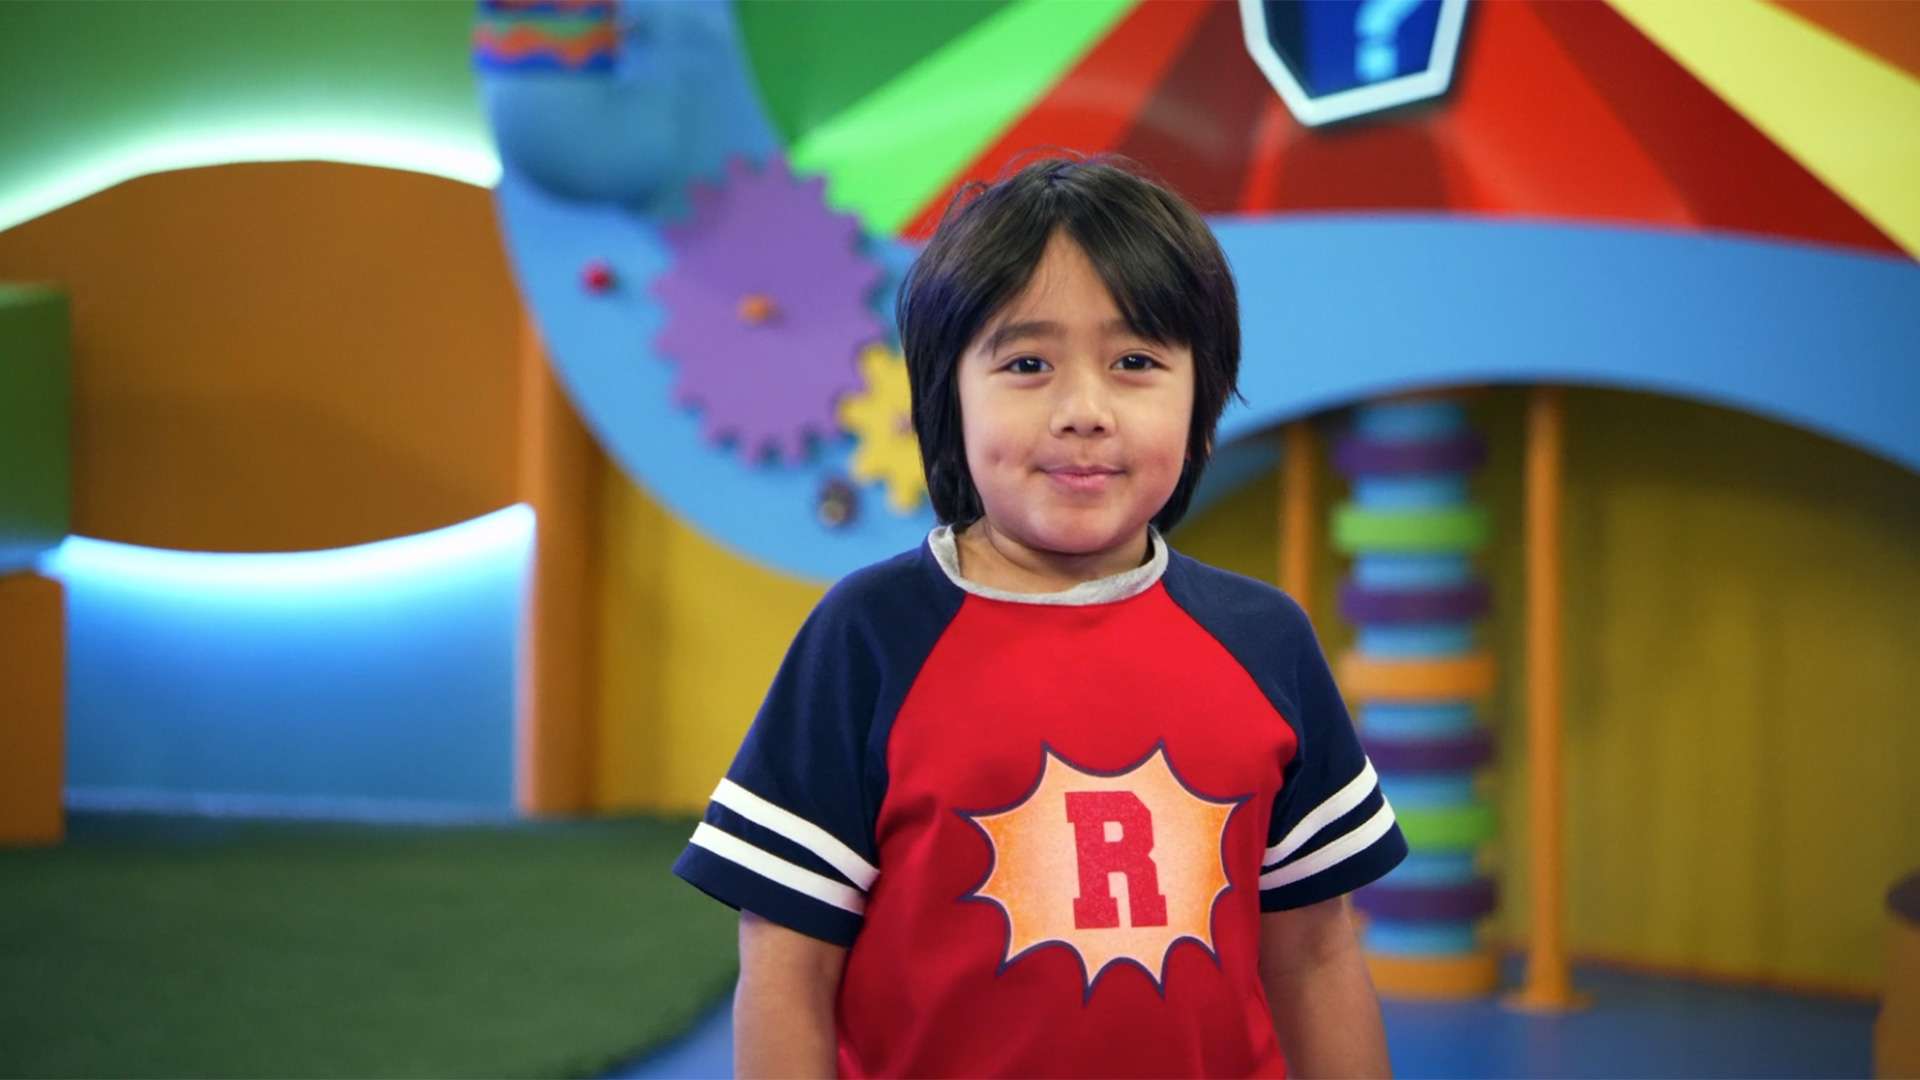 Ryan ToysReview: Age Earning Net Worth And Every Details You Must Know